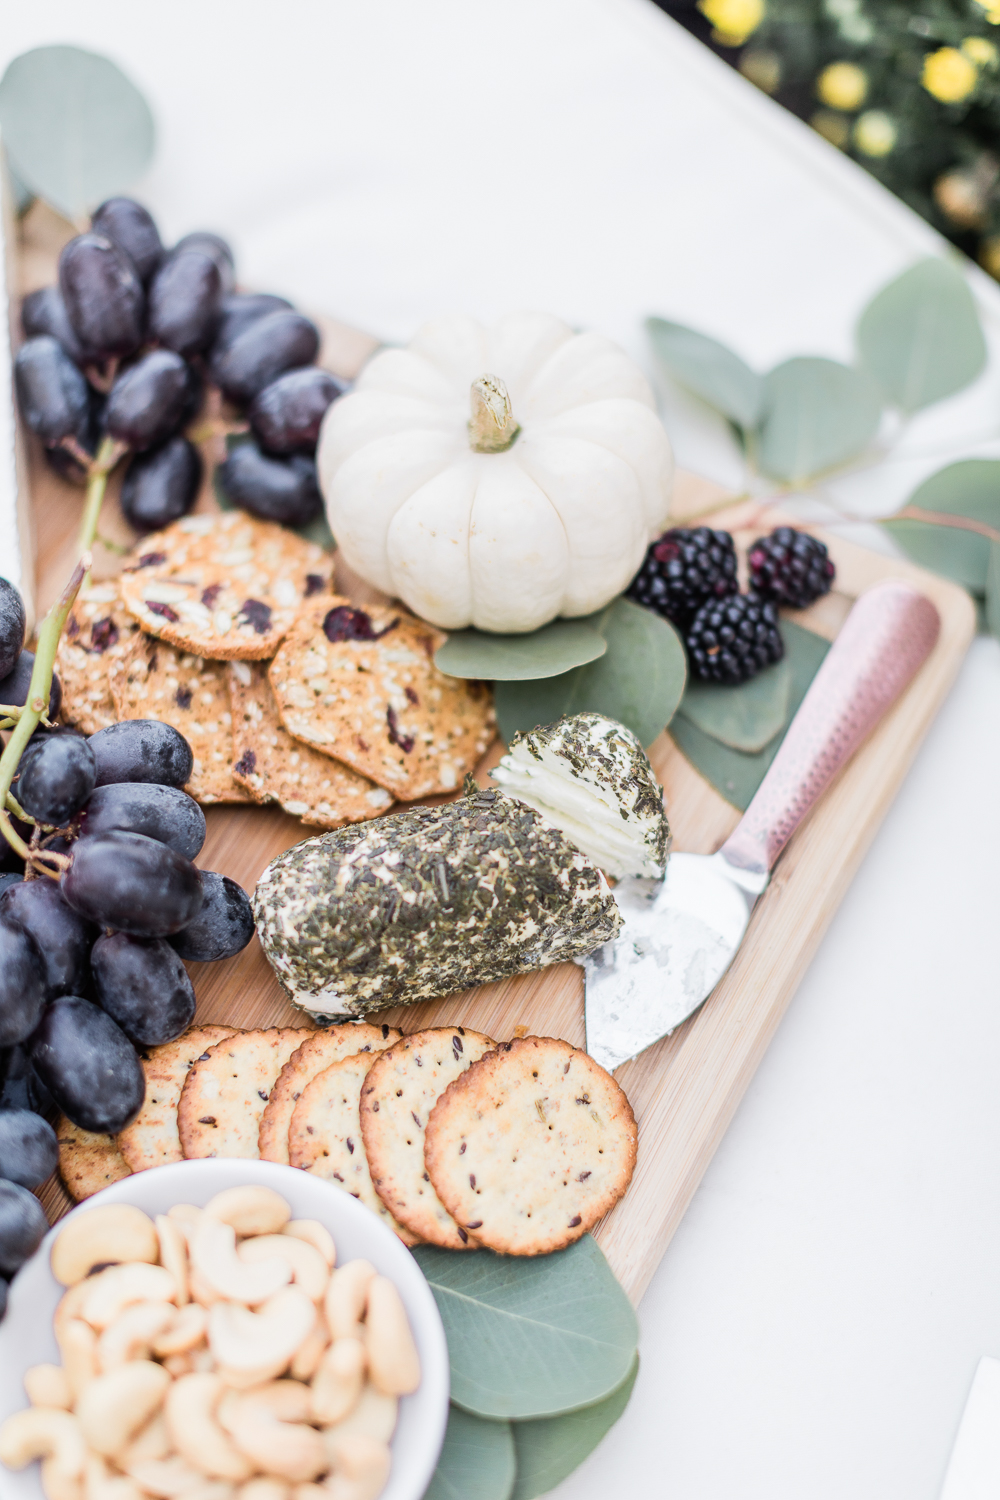 Fall charcuterie and cheese board created by blogger Stephanie Ziajka on Diary of a Debutante